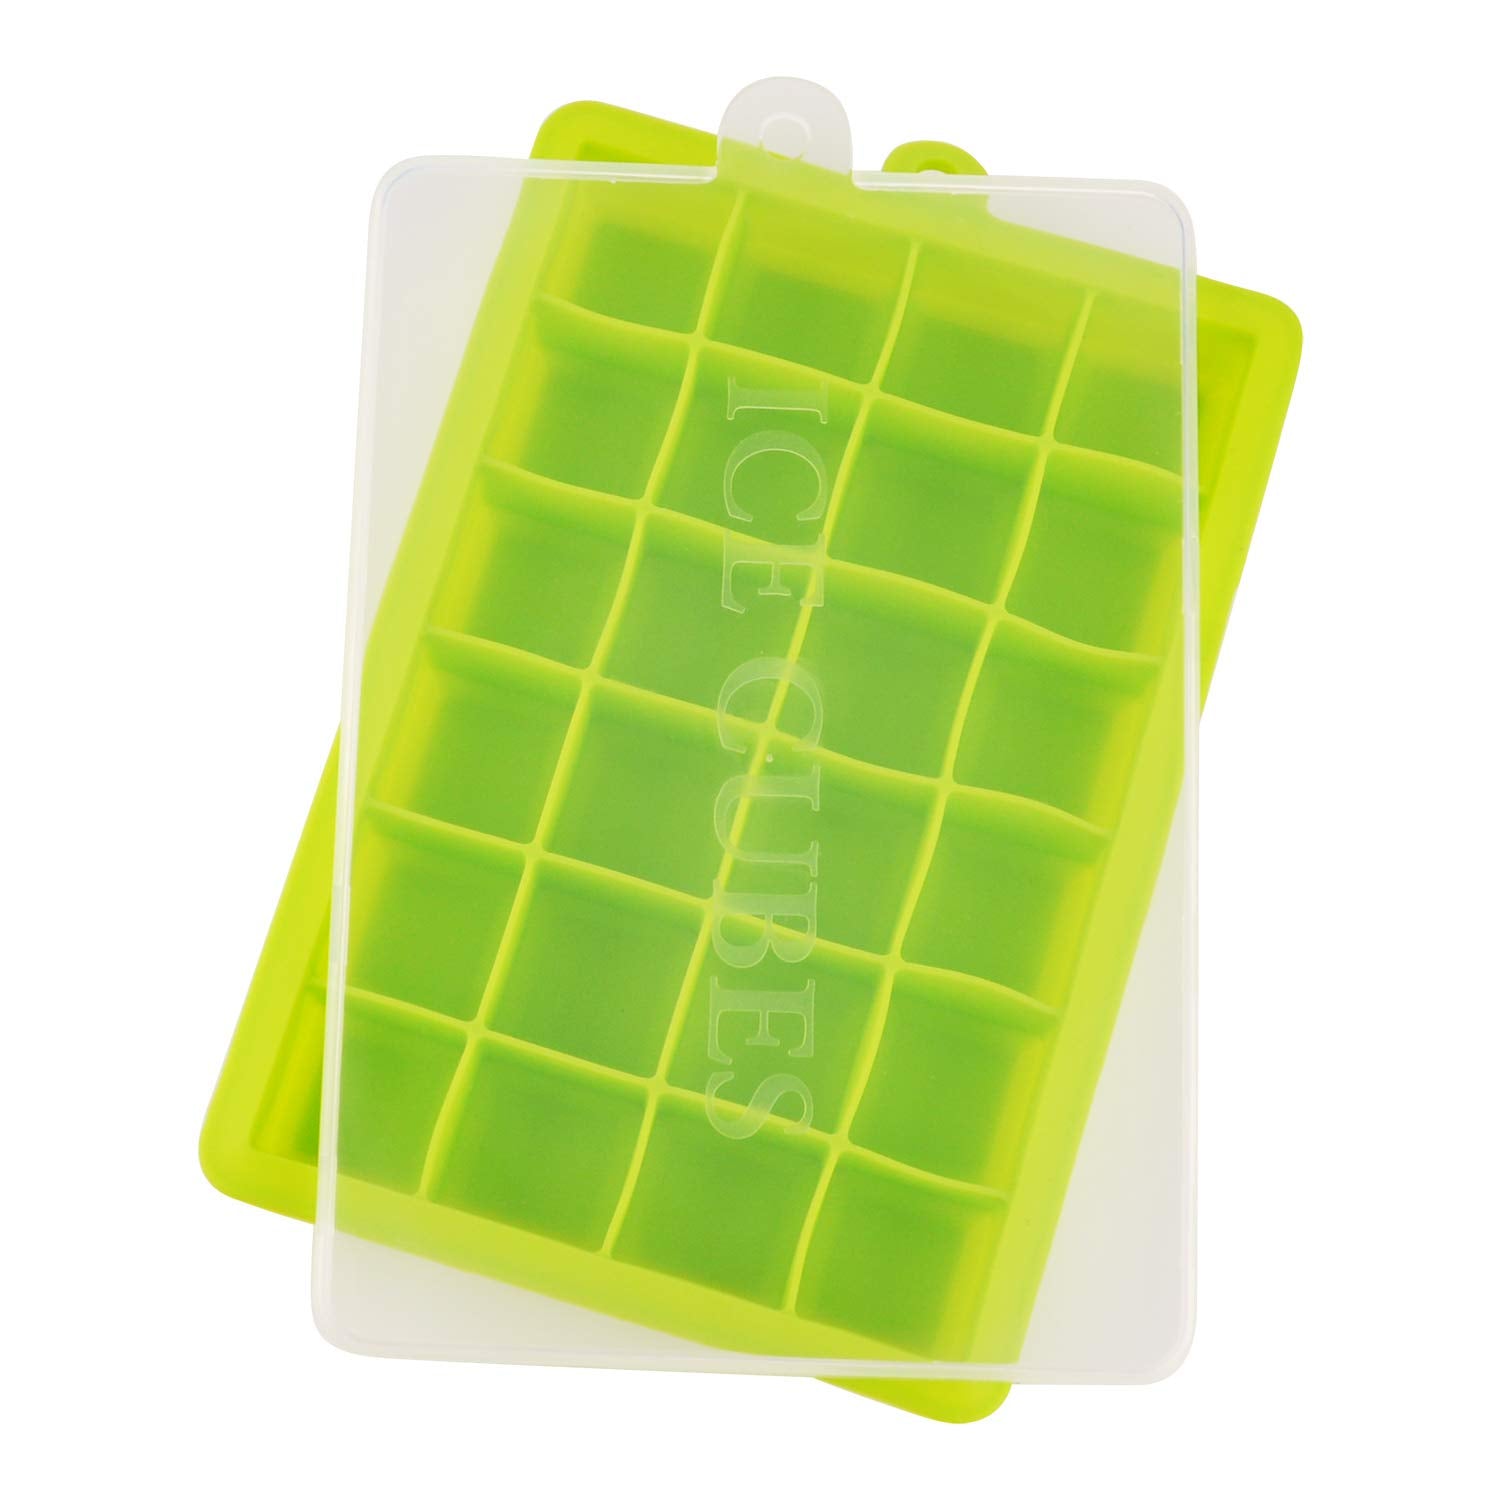 Ice Cube Tray, Silicone Ice Tray Molds Easy Release Ice Jelly Pudding Maker Mold,24 Cavity (Green)